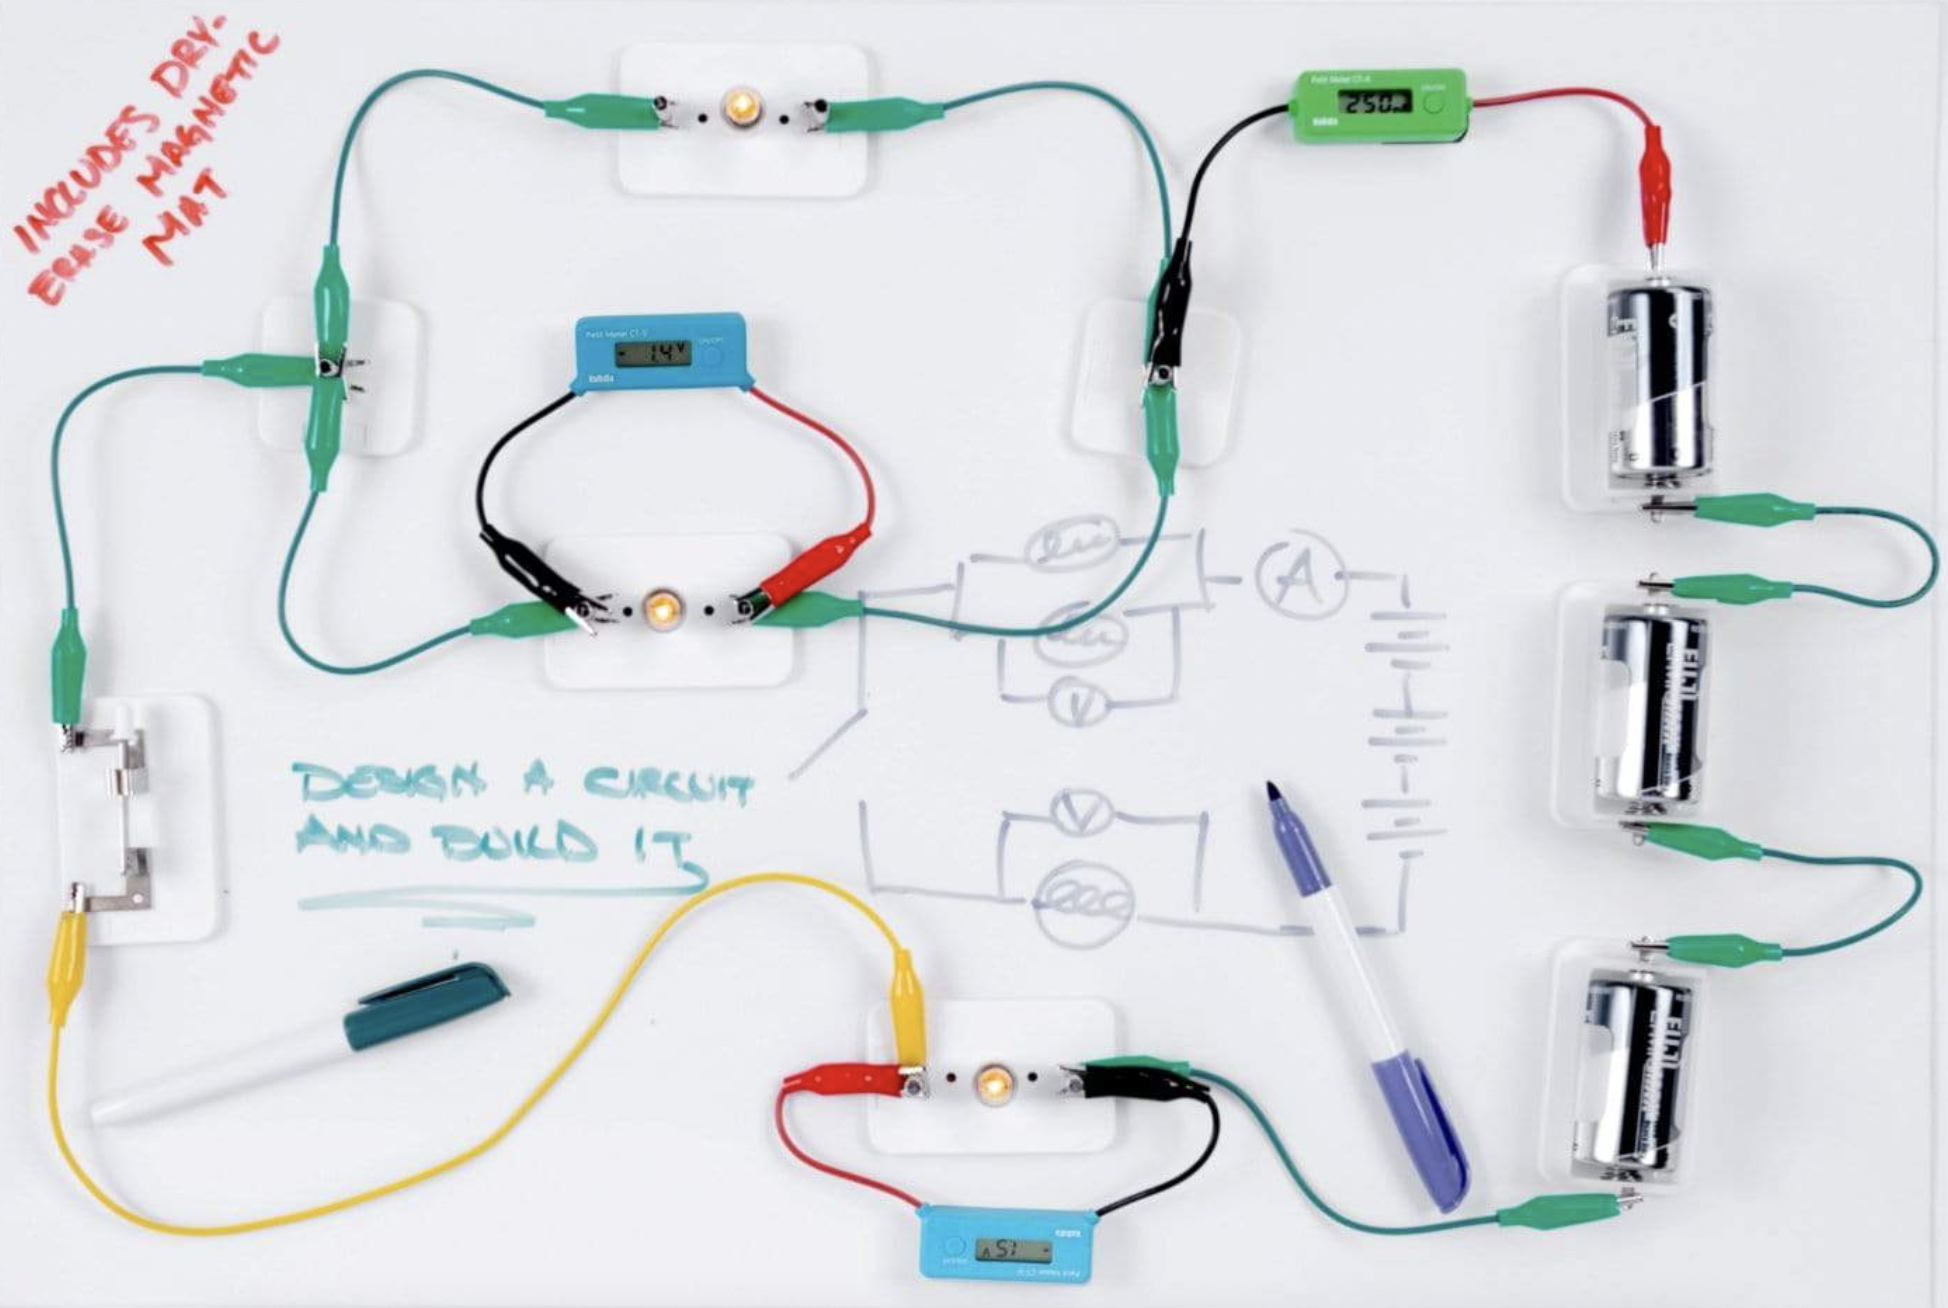 A Beginner's Guide To Understanding Electrical Circuits